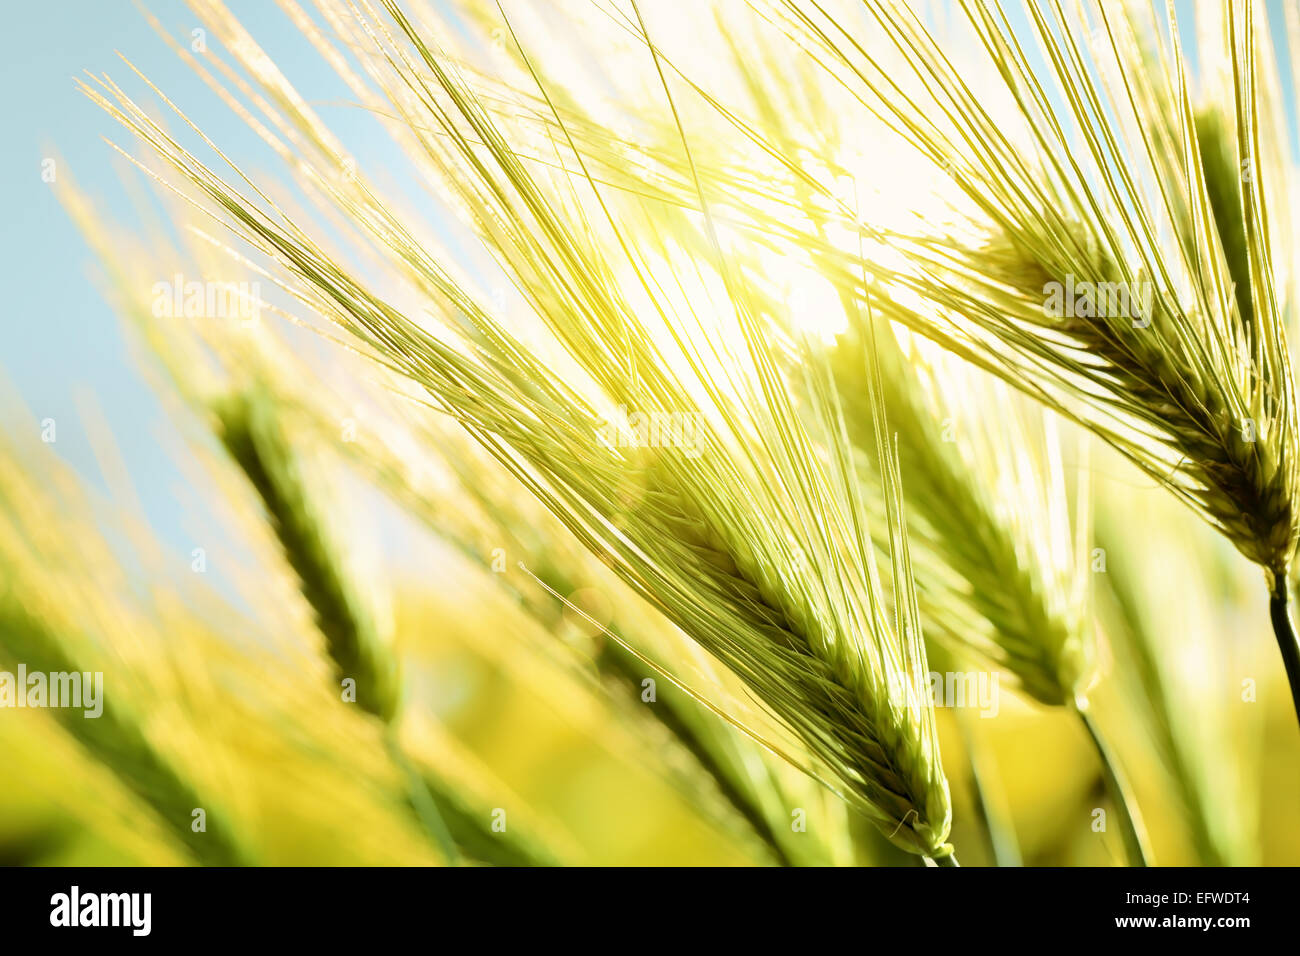 Green wheat in field at sunset Stock Photo